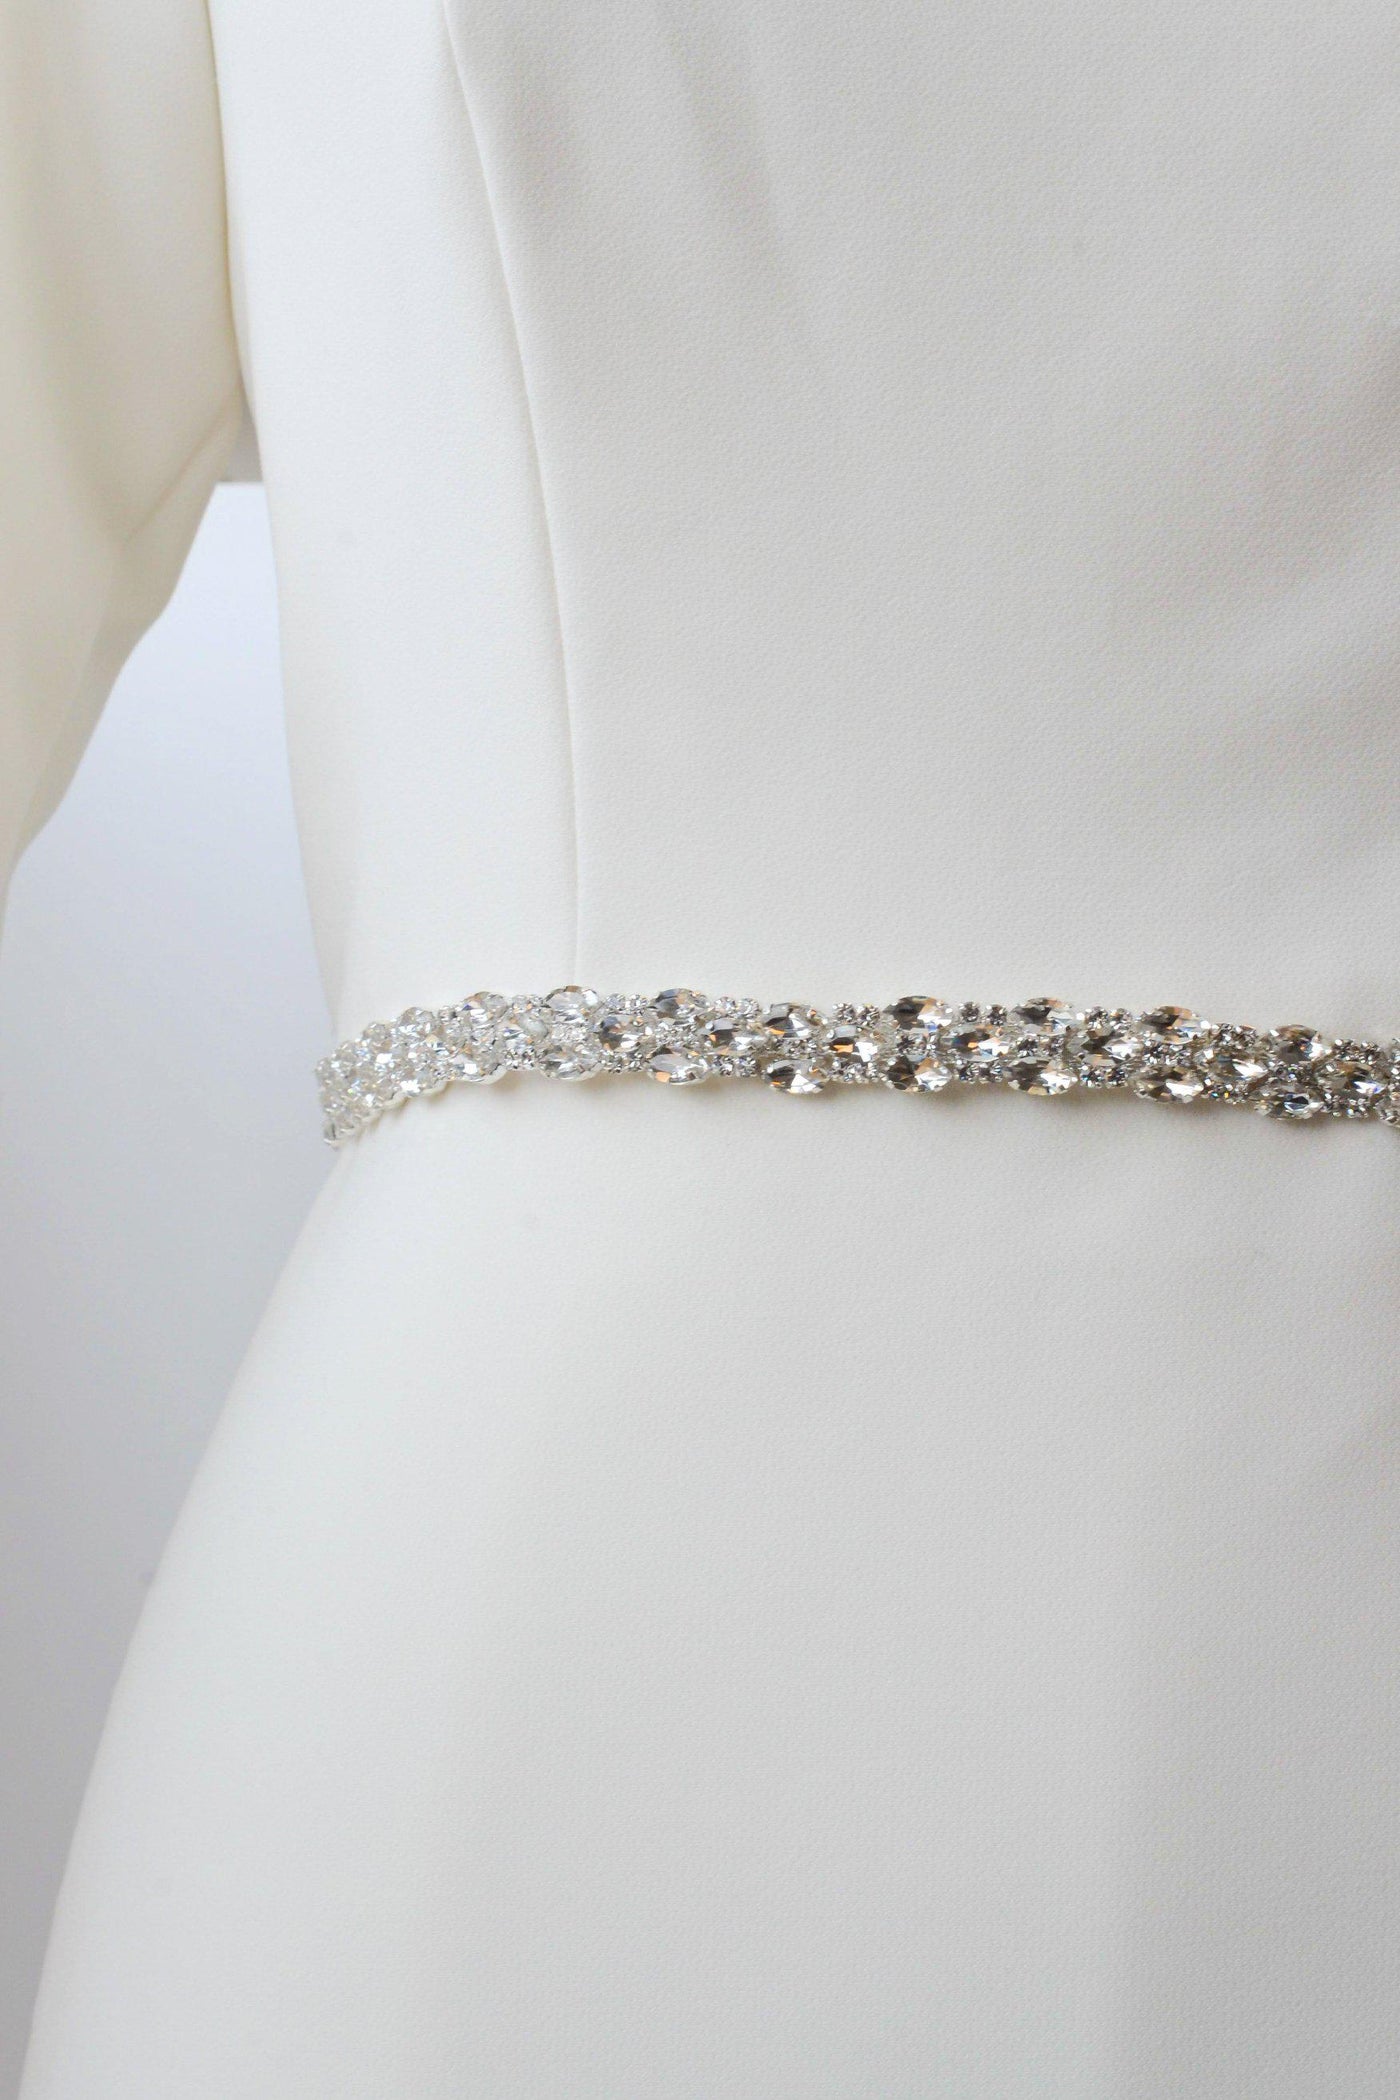 silver metal belt accented with crystals from bridal shop in salt lake city utah